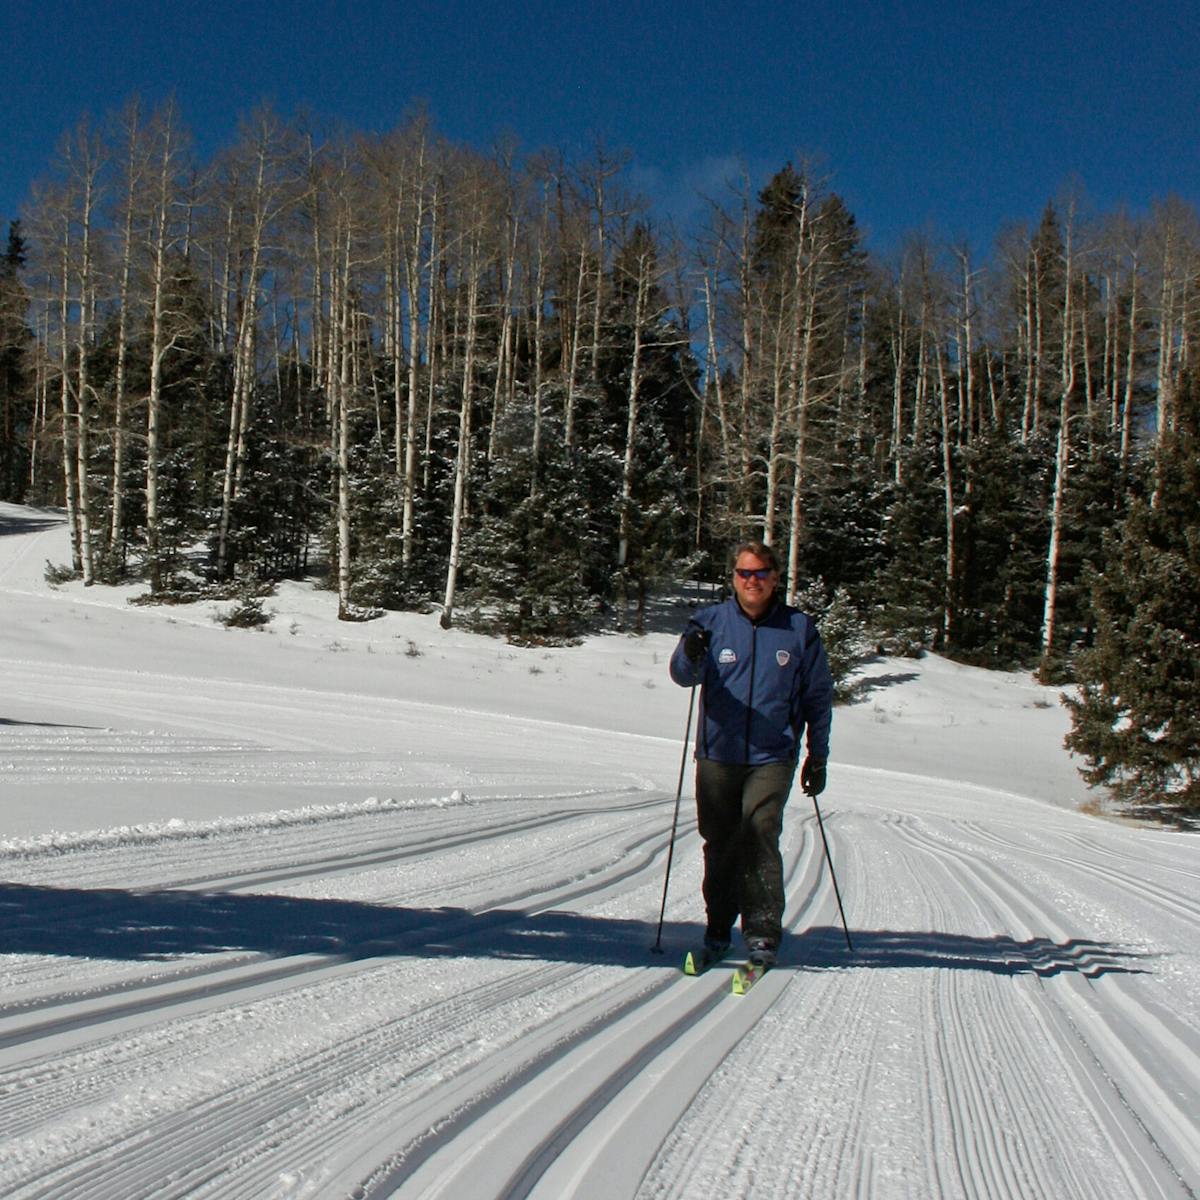 a man riding skis down a snow covered slope